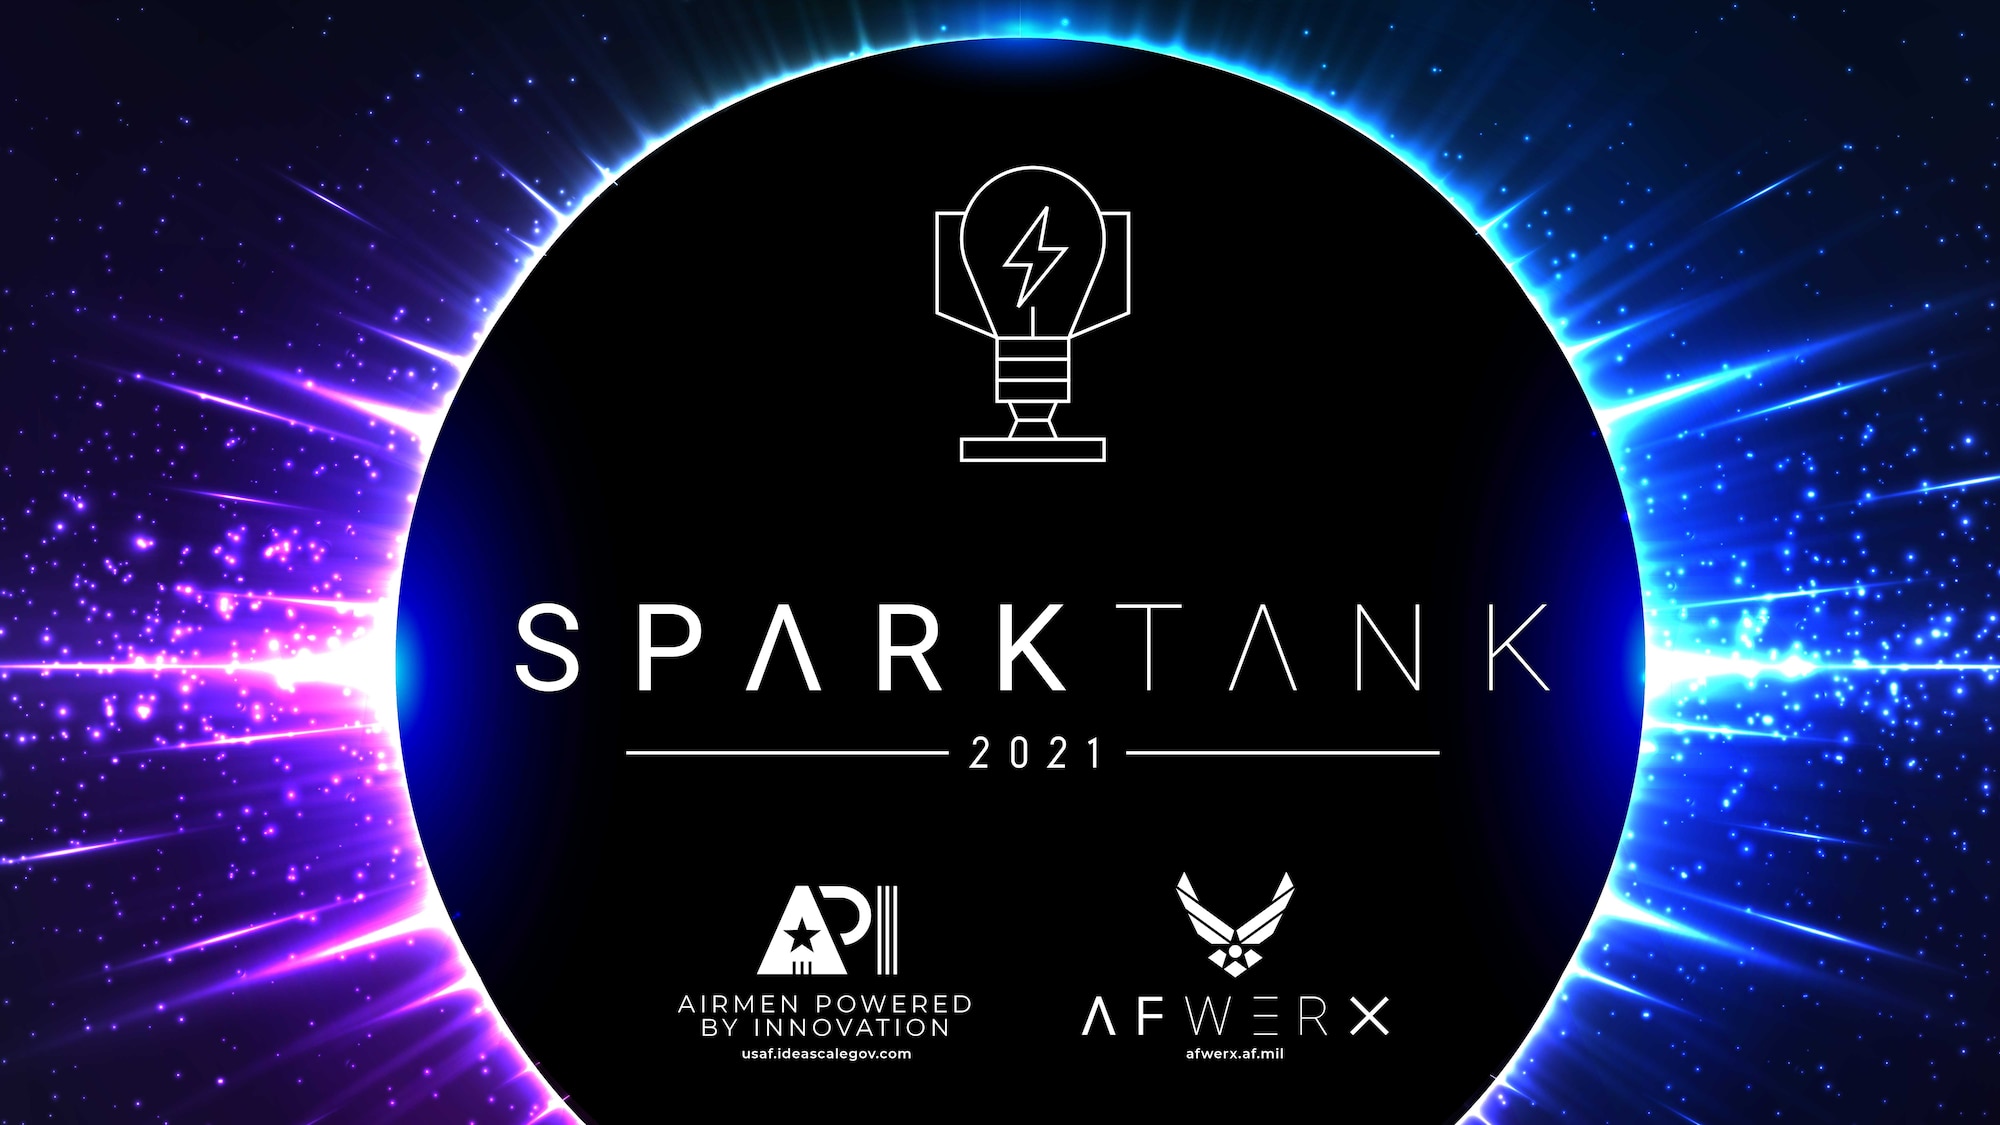 Spark Tank, a collaboration between AFWERX and Deputy Under Secretary of the Air Force, Management, is now accepting submissions for the 2021 campaign from July 1 to October 16, 2020. The annual campaign is designed to spur and empower innovative ideas from Airmen to further strengthen Air Force culture and capabilities. (U.S. Air Force courtesy photo)